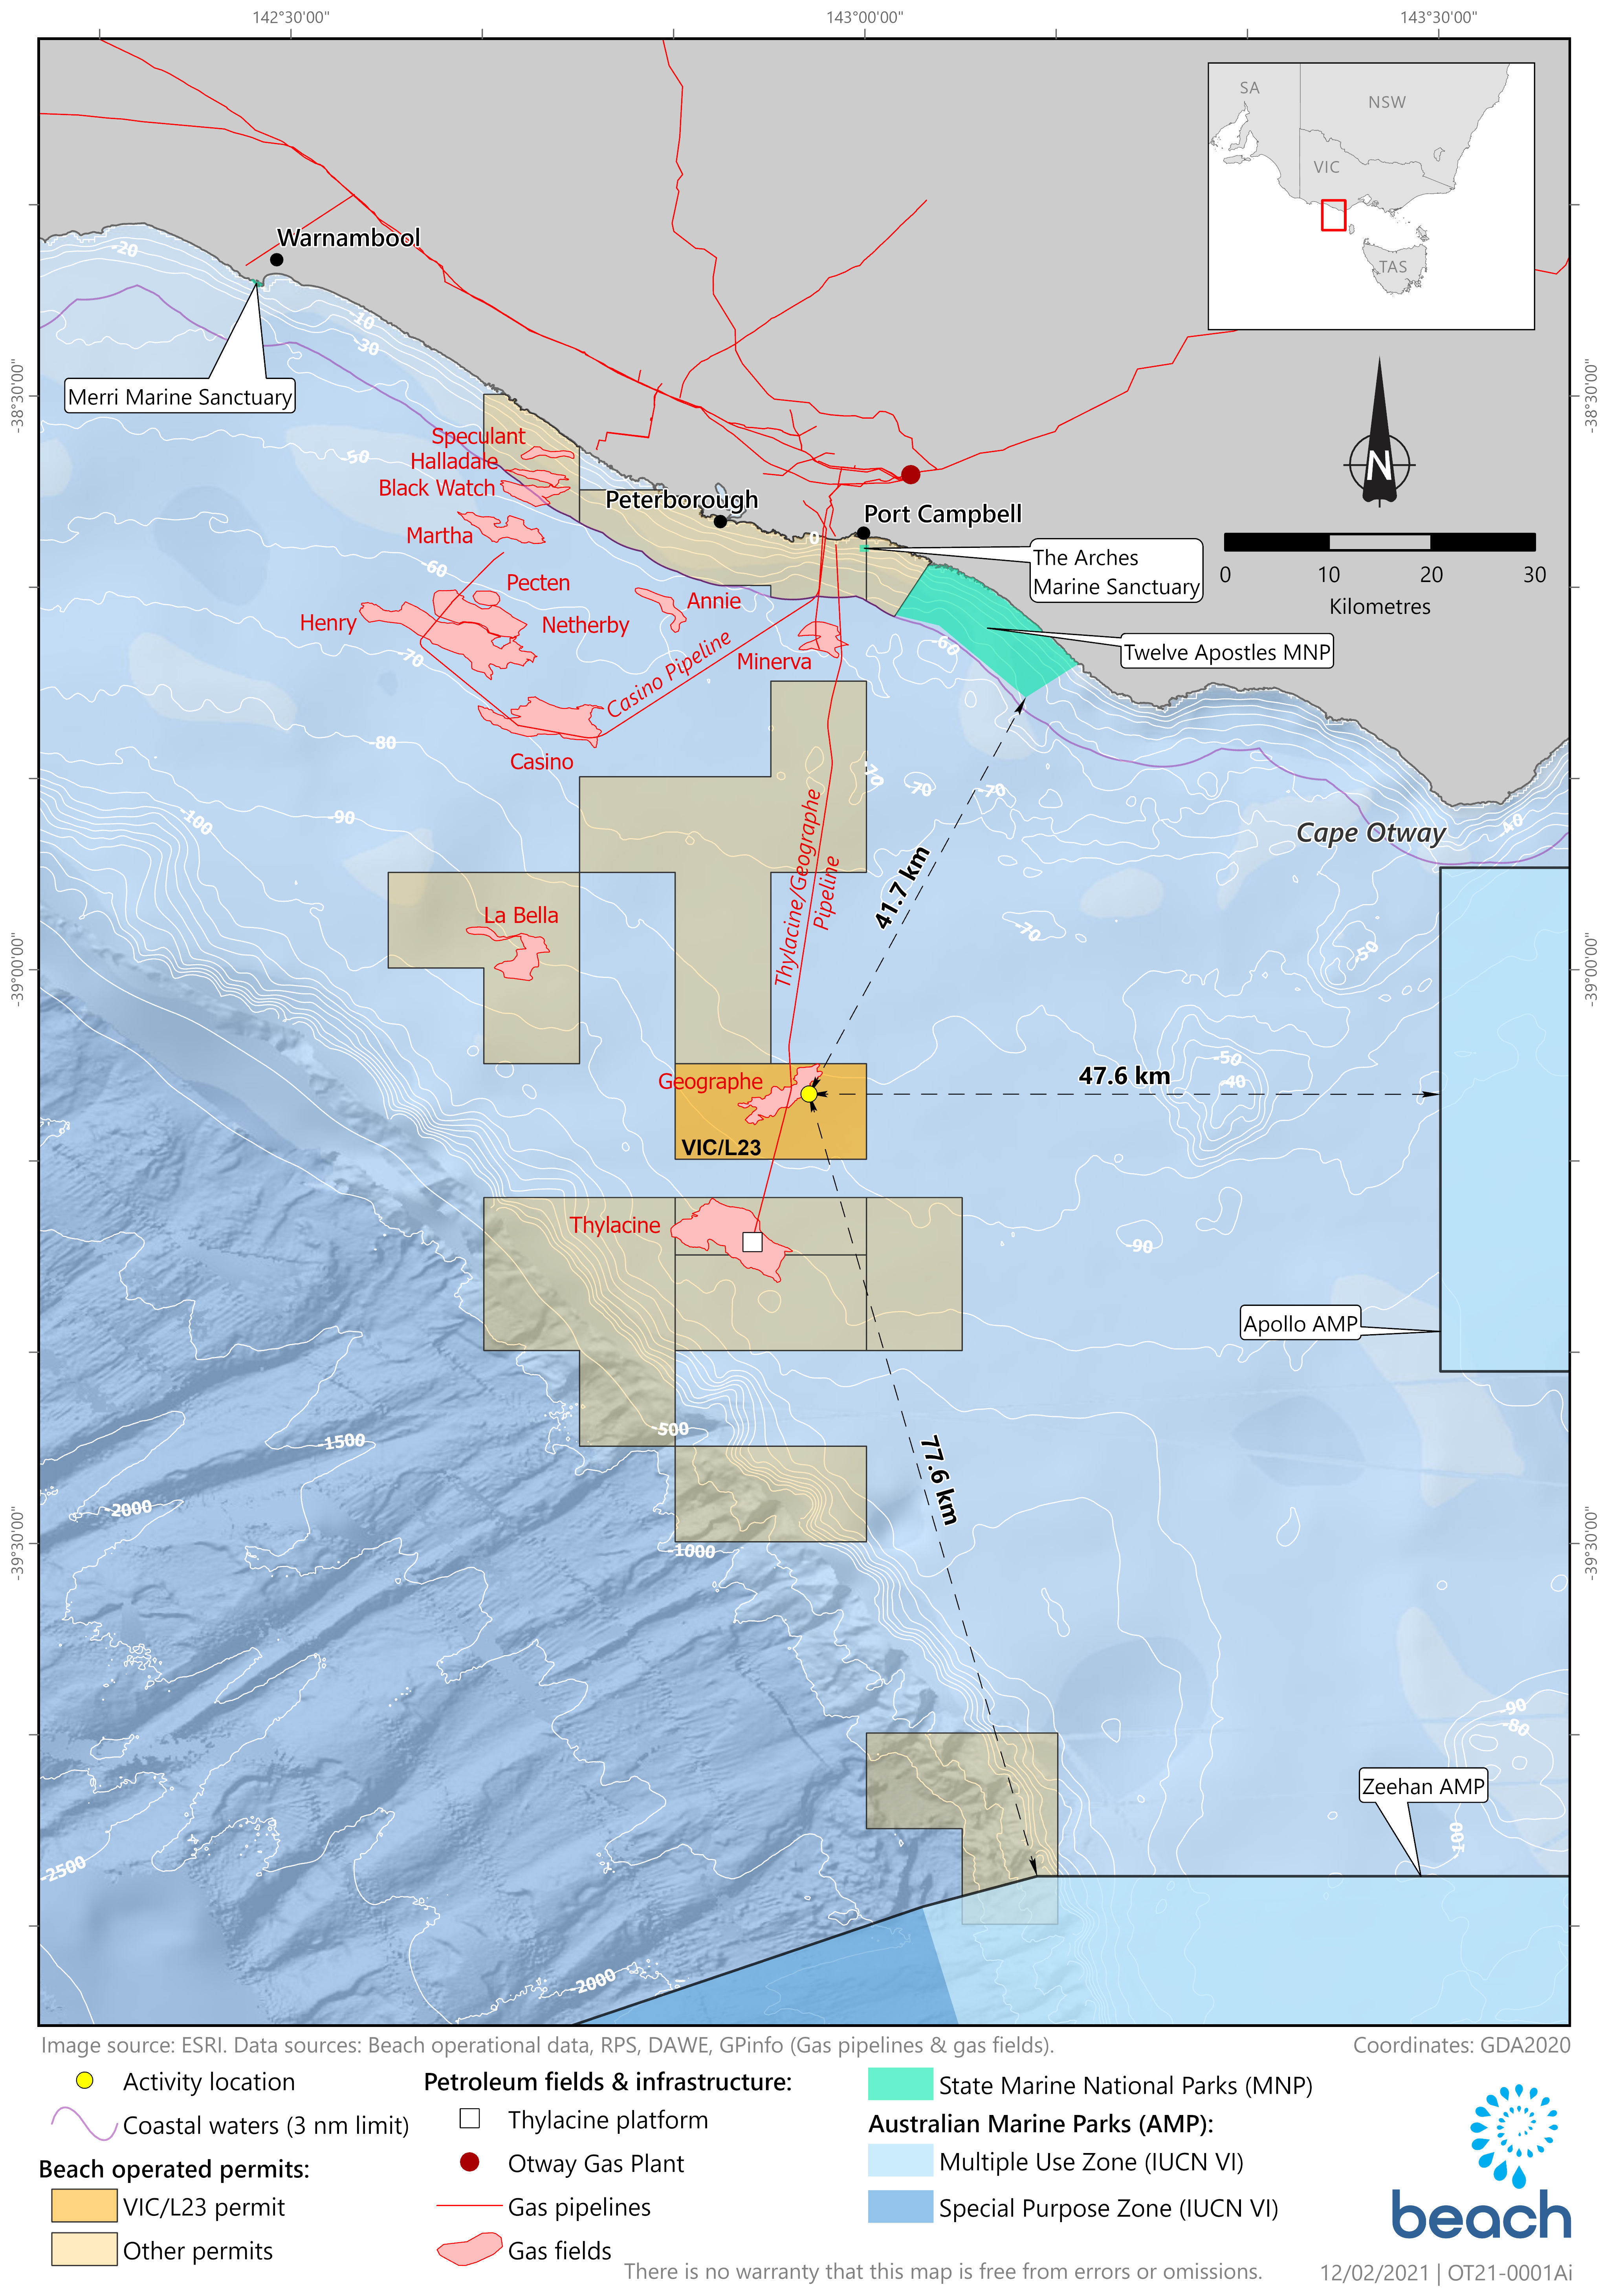 Location map - Activity: Geographe Subsea Installation and Commissioning  (refer to description)